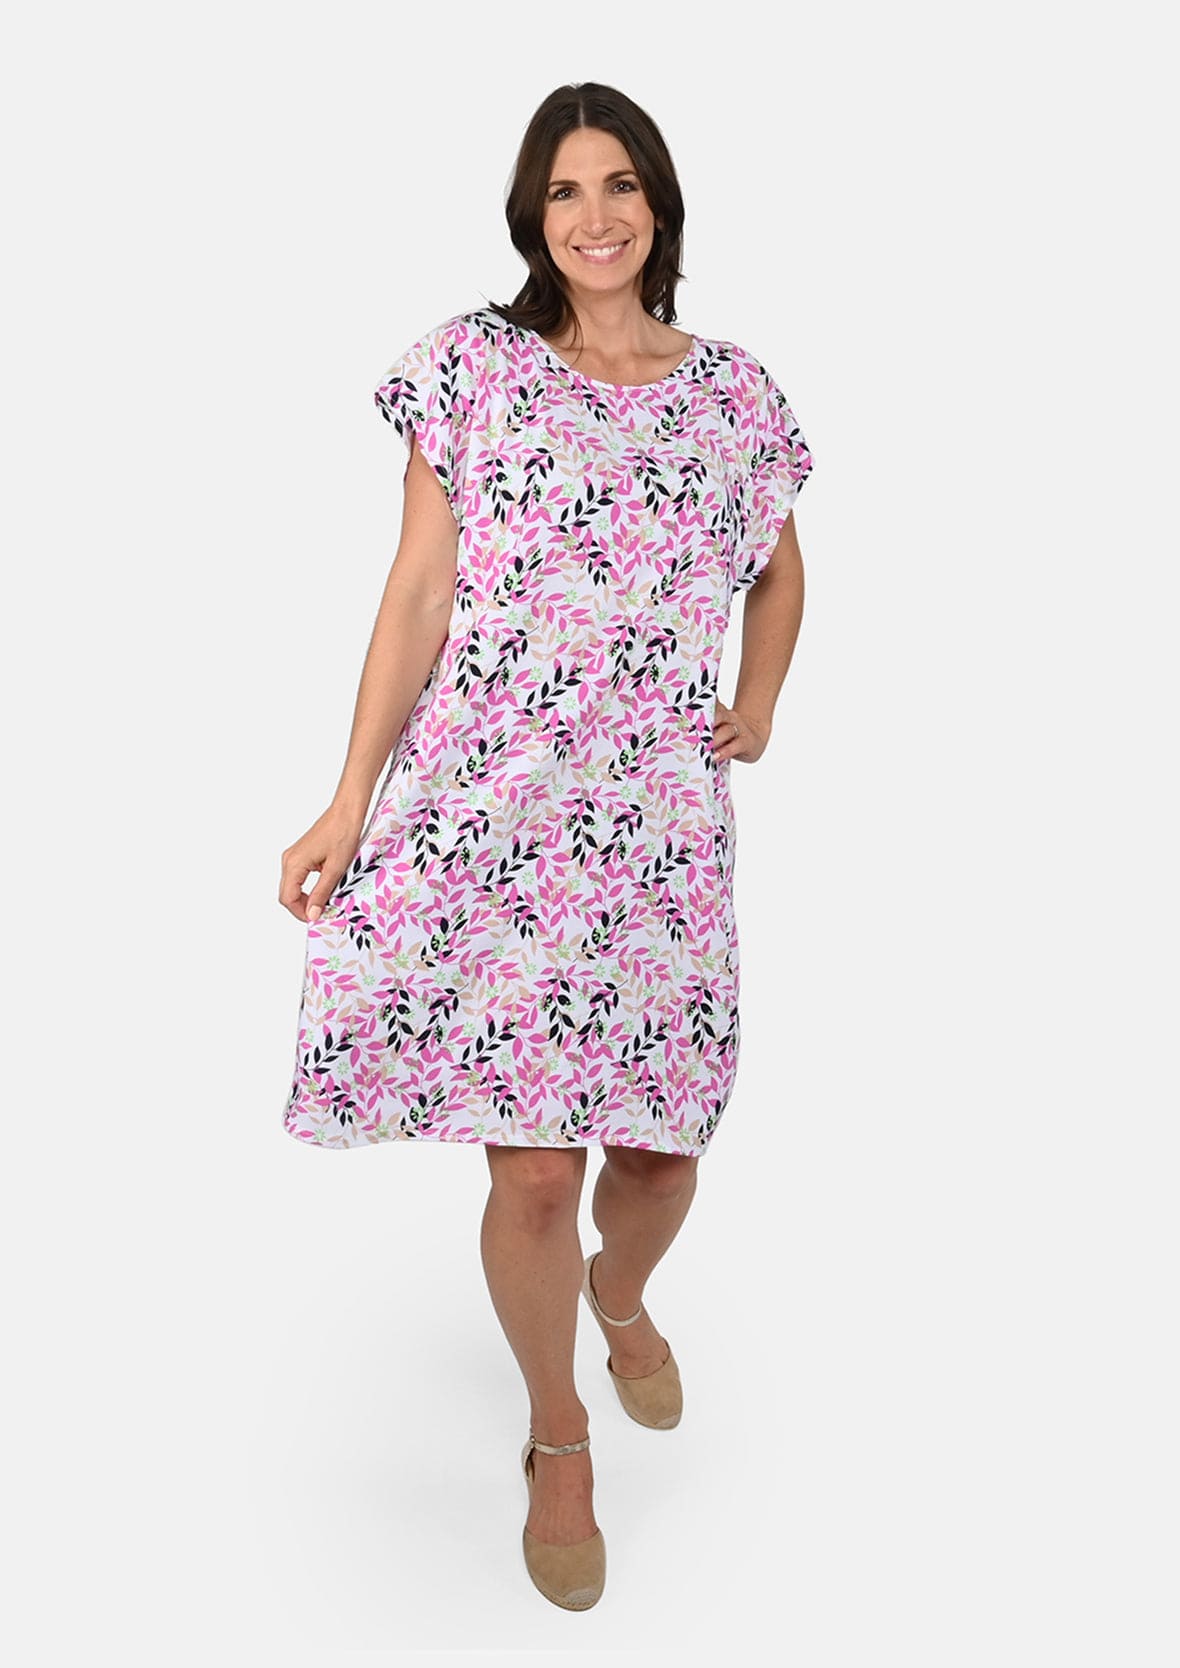 lady wearing crew neck floral pink tunic dress #color_Pink Printed